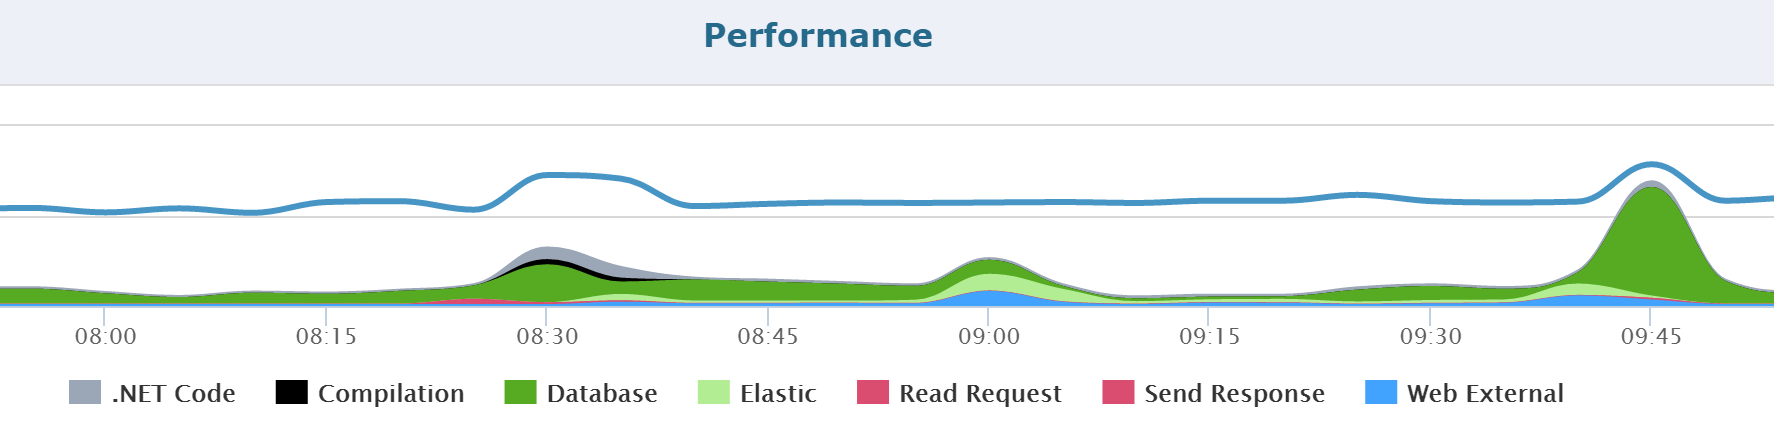 performance-by-stack